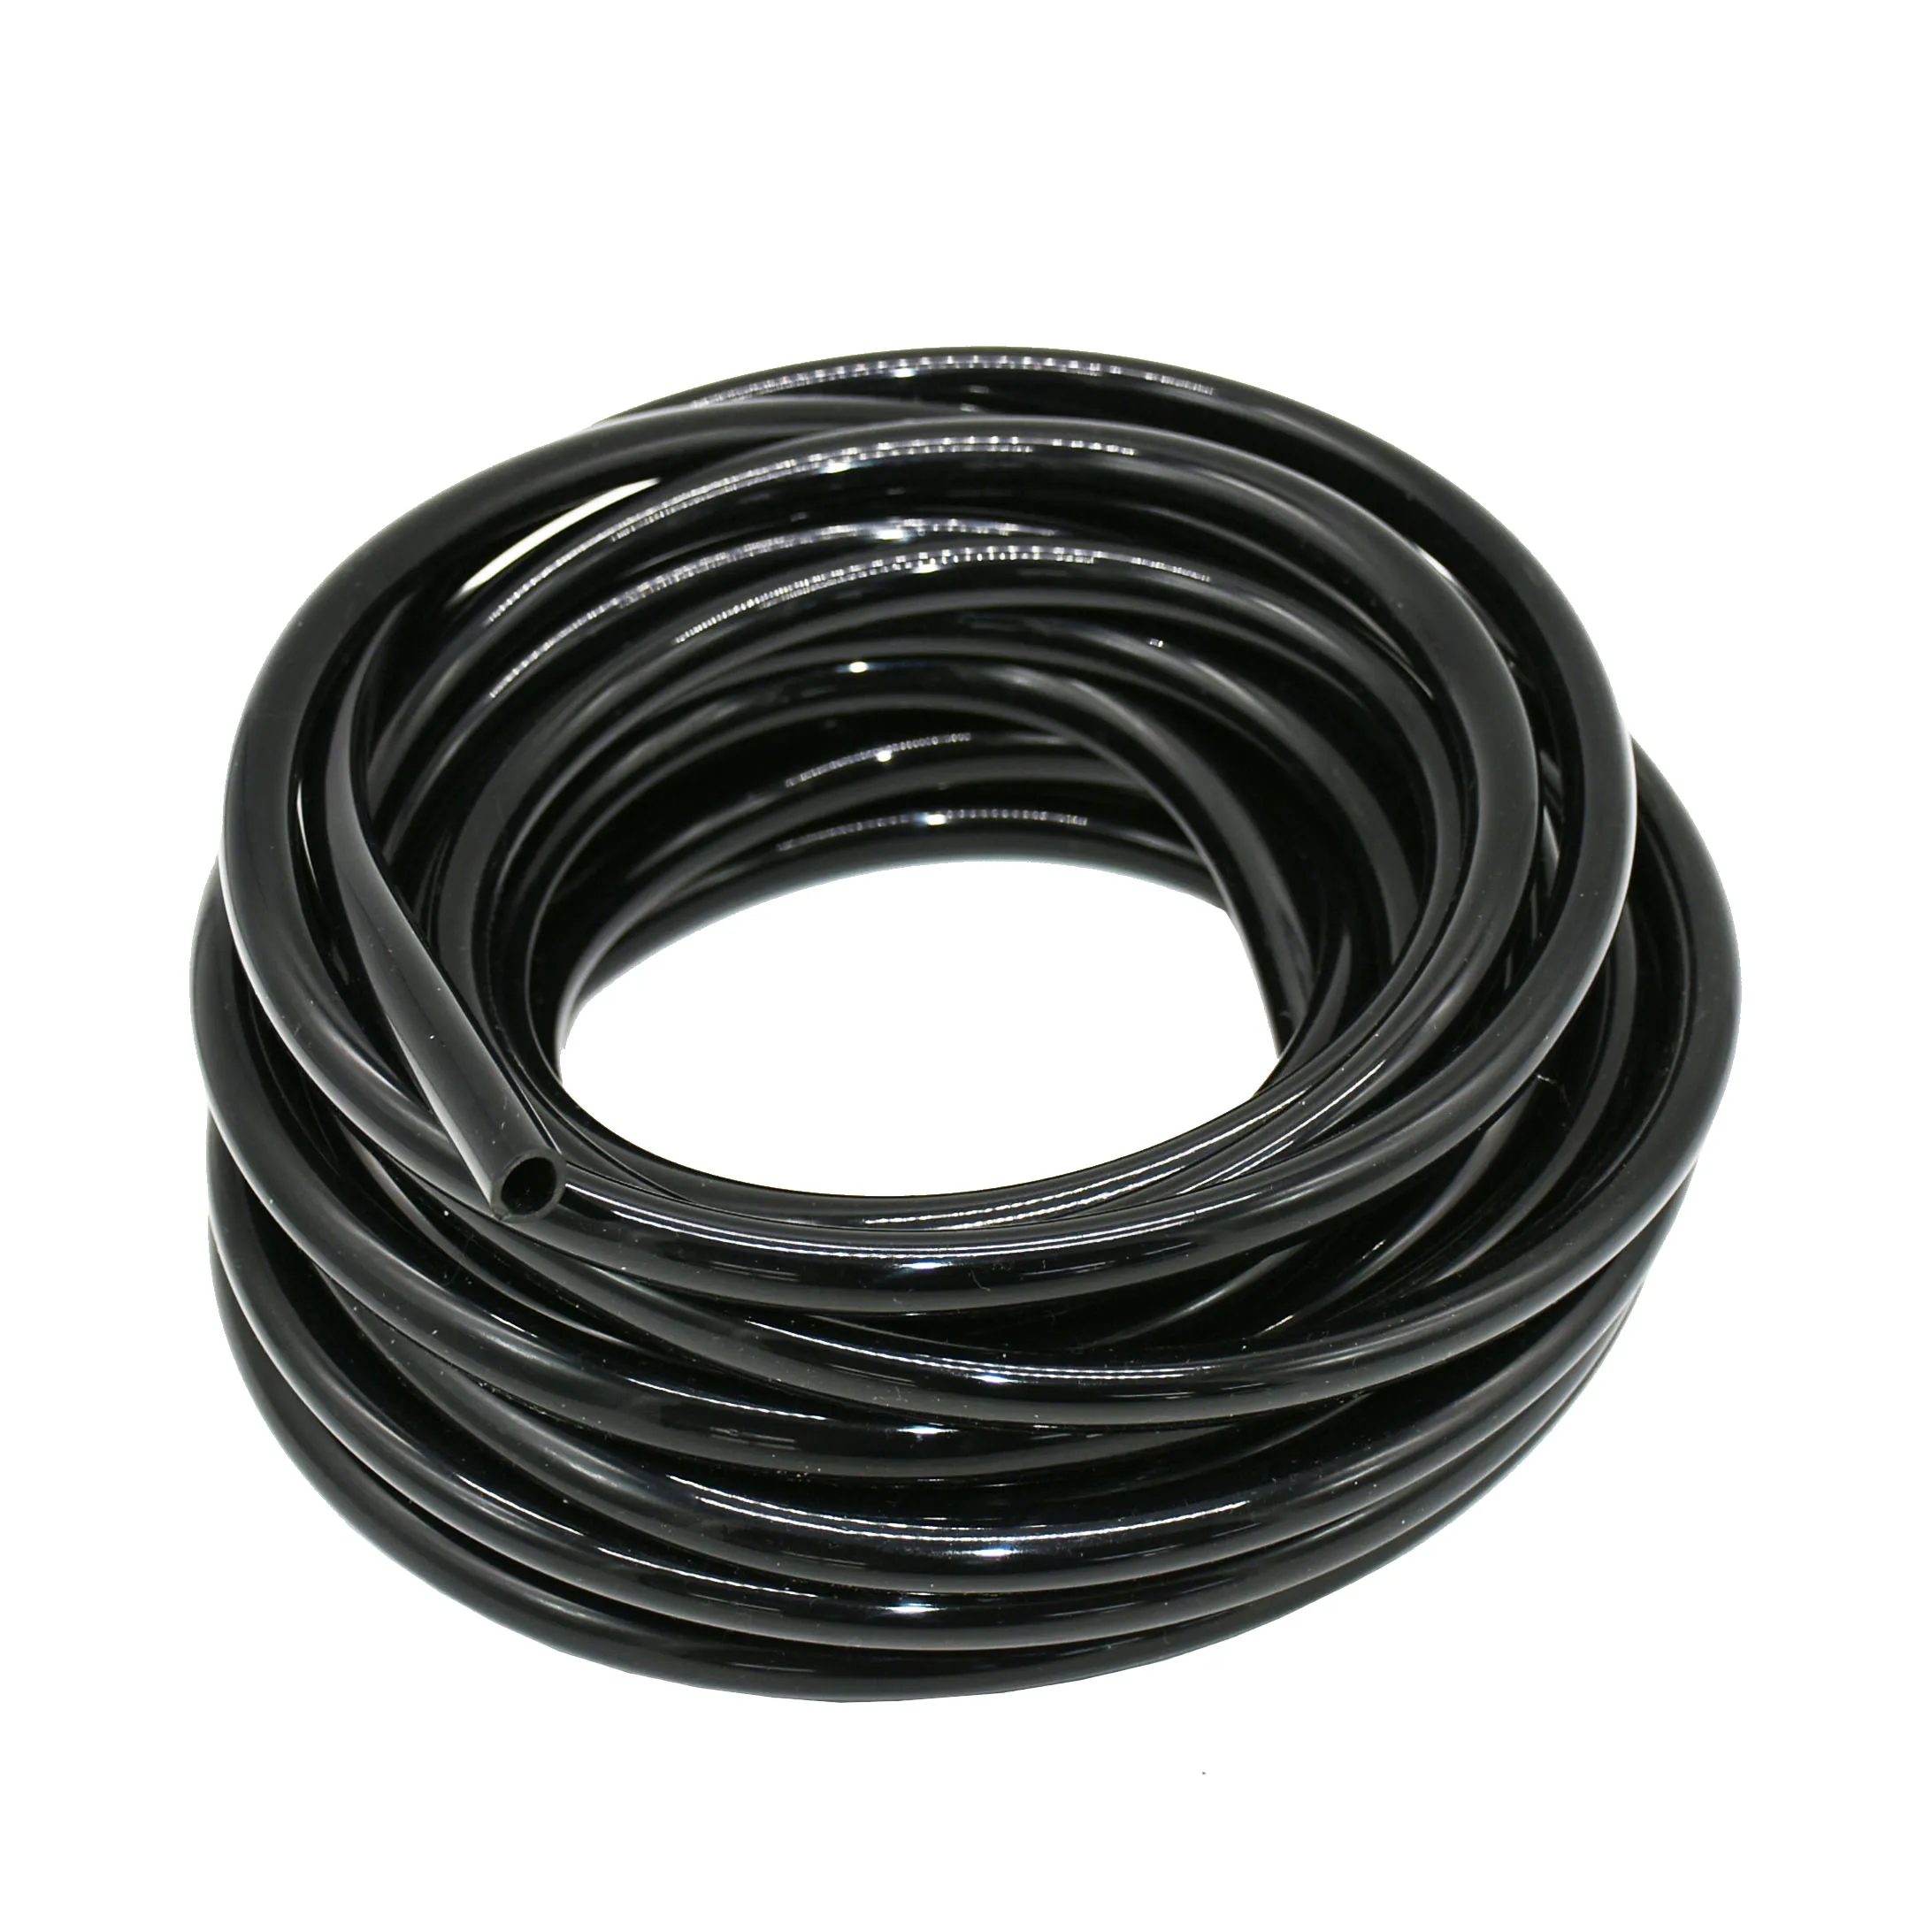 3/8" flexible garden hose 8/11 expandable garden hose pip irrigation watering water pipe 10m 20m 30m images - 6